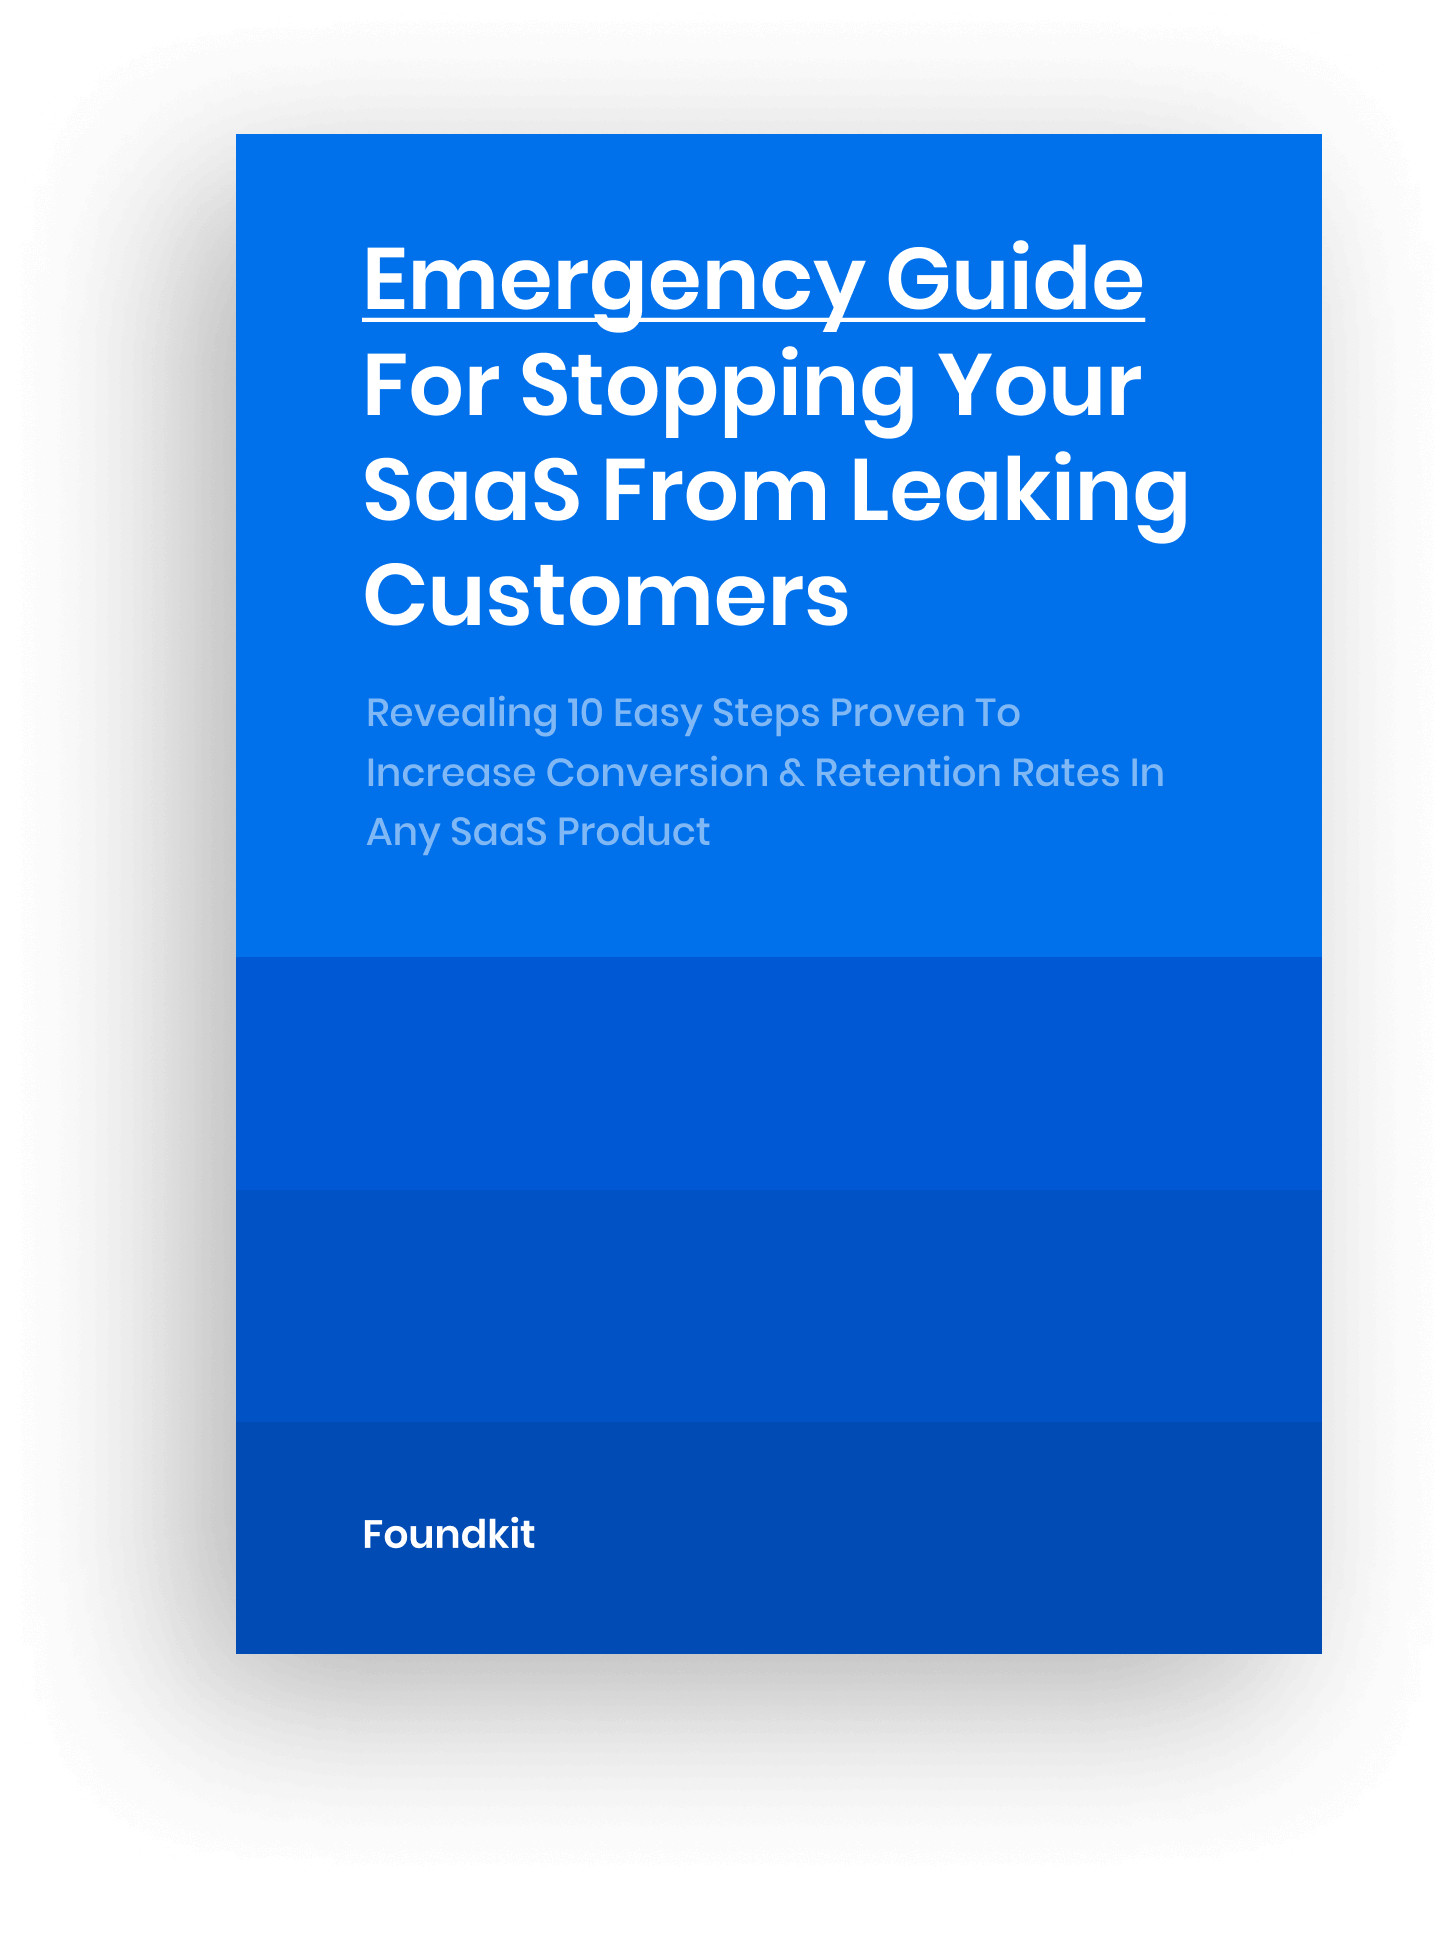 10 Steps Emergency Guide For Stopping Your SaaS From Leaking Customers